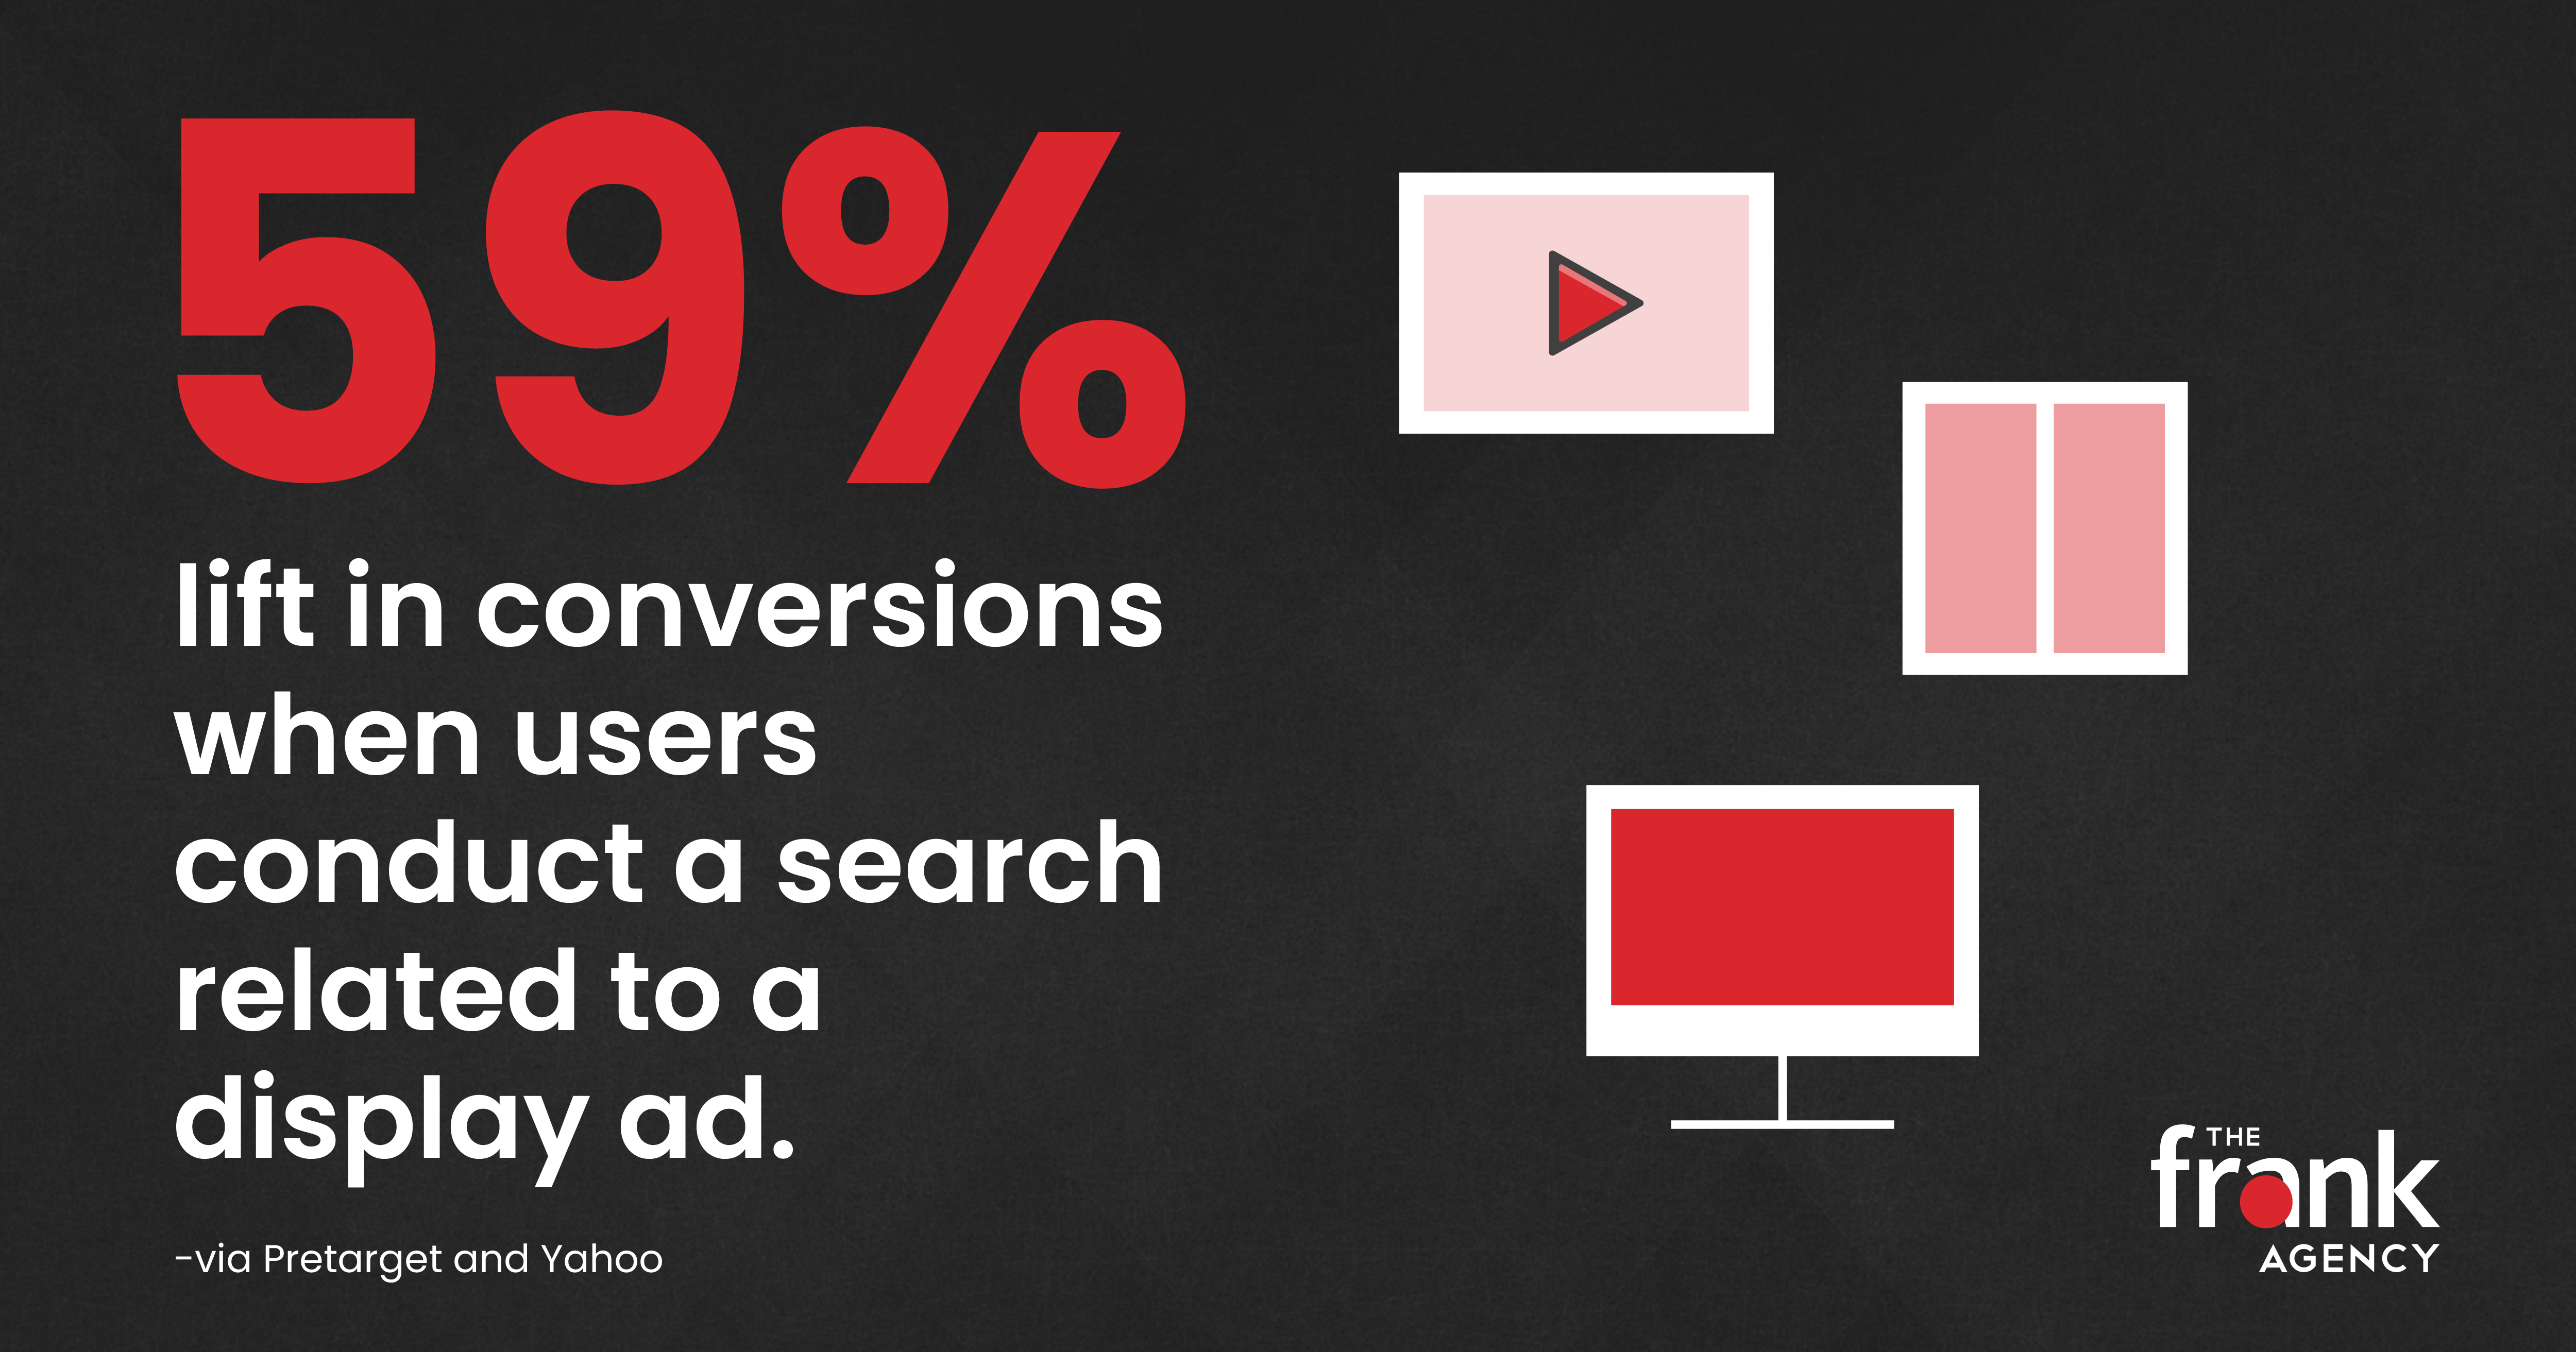 Display ad viewers have a 59% higher conversion rate